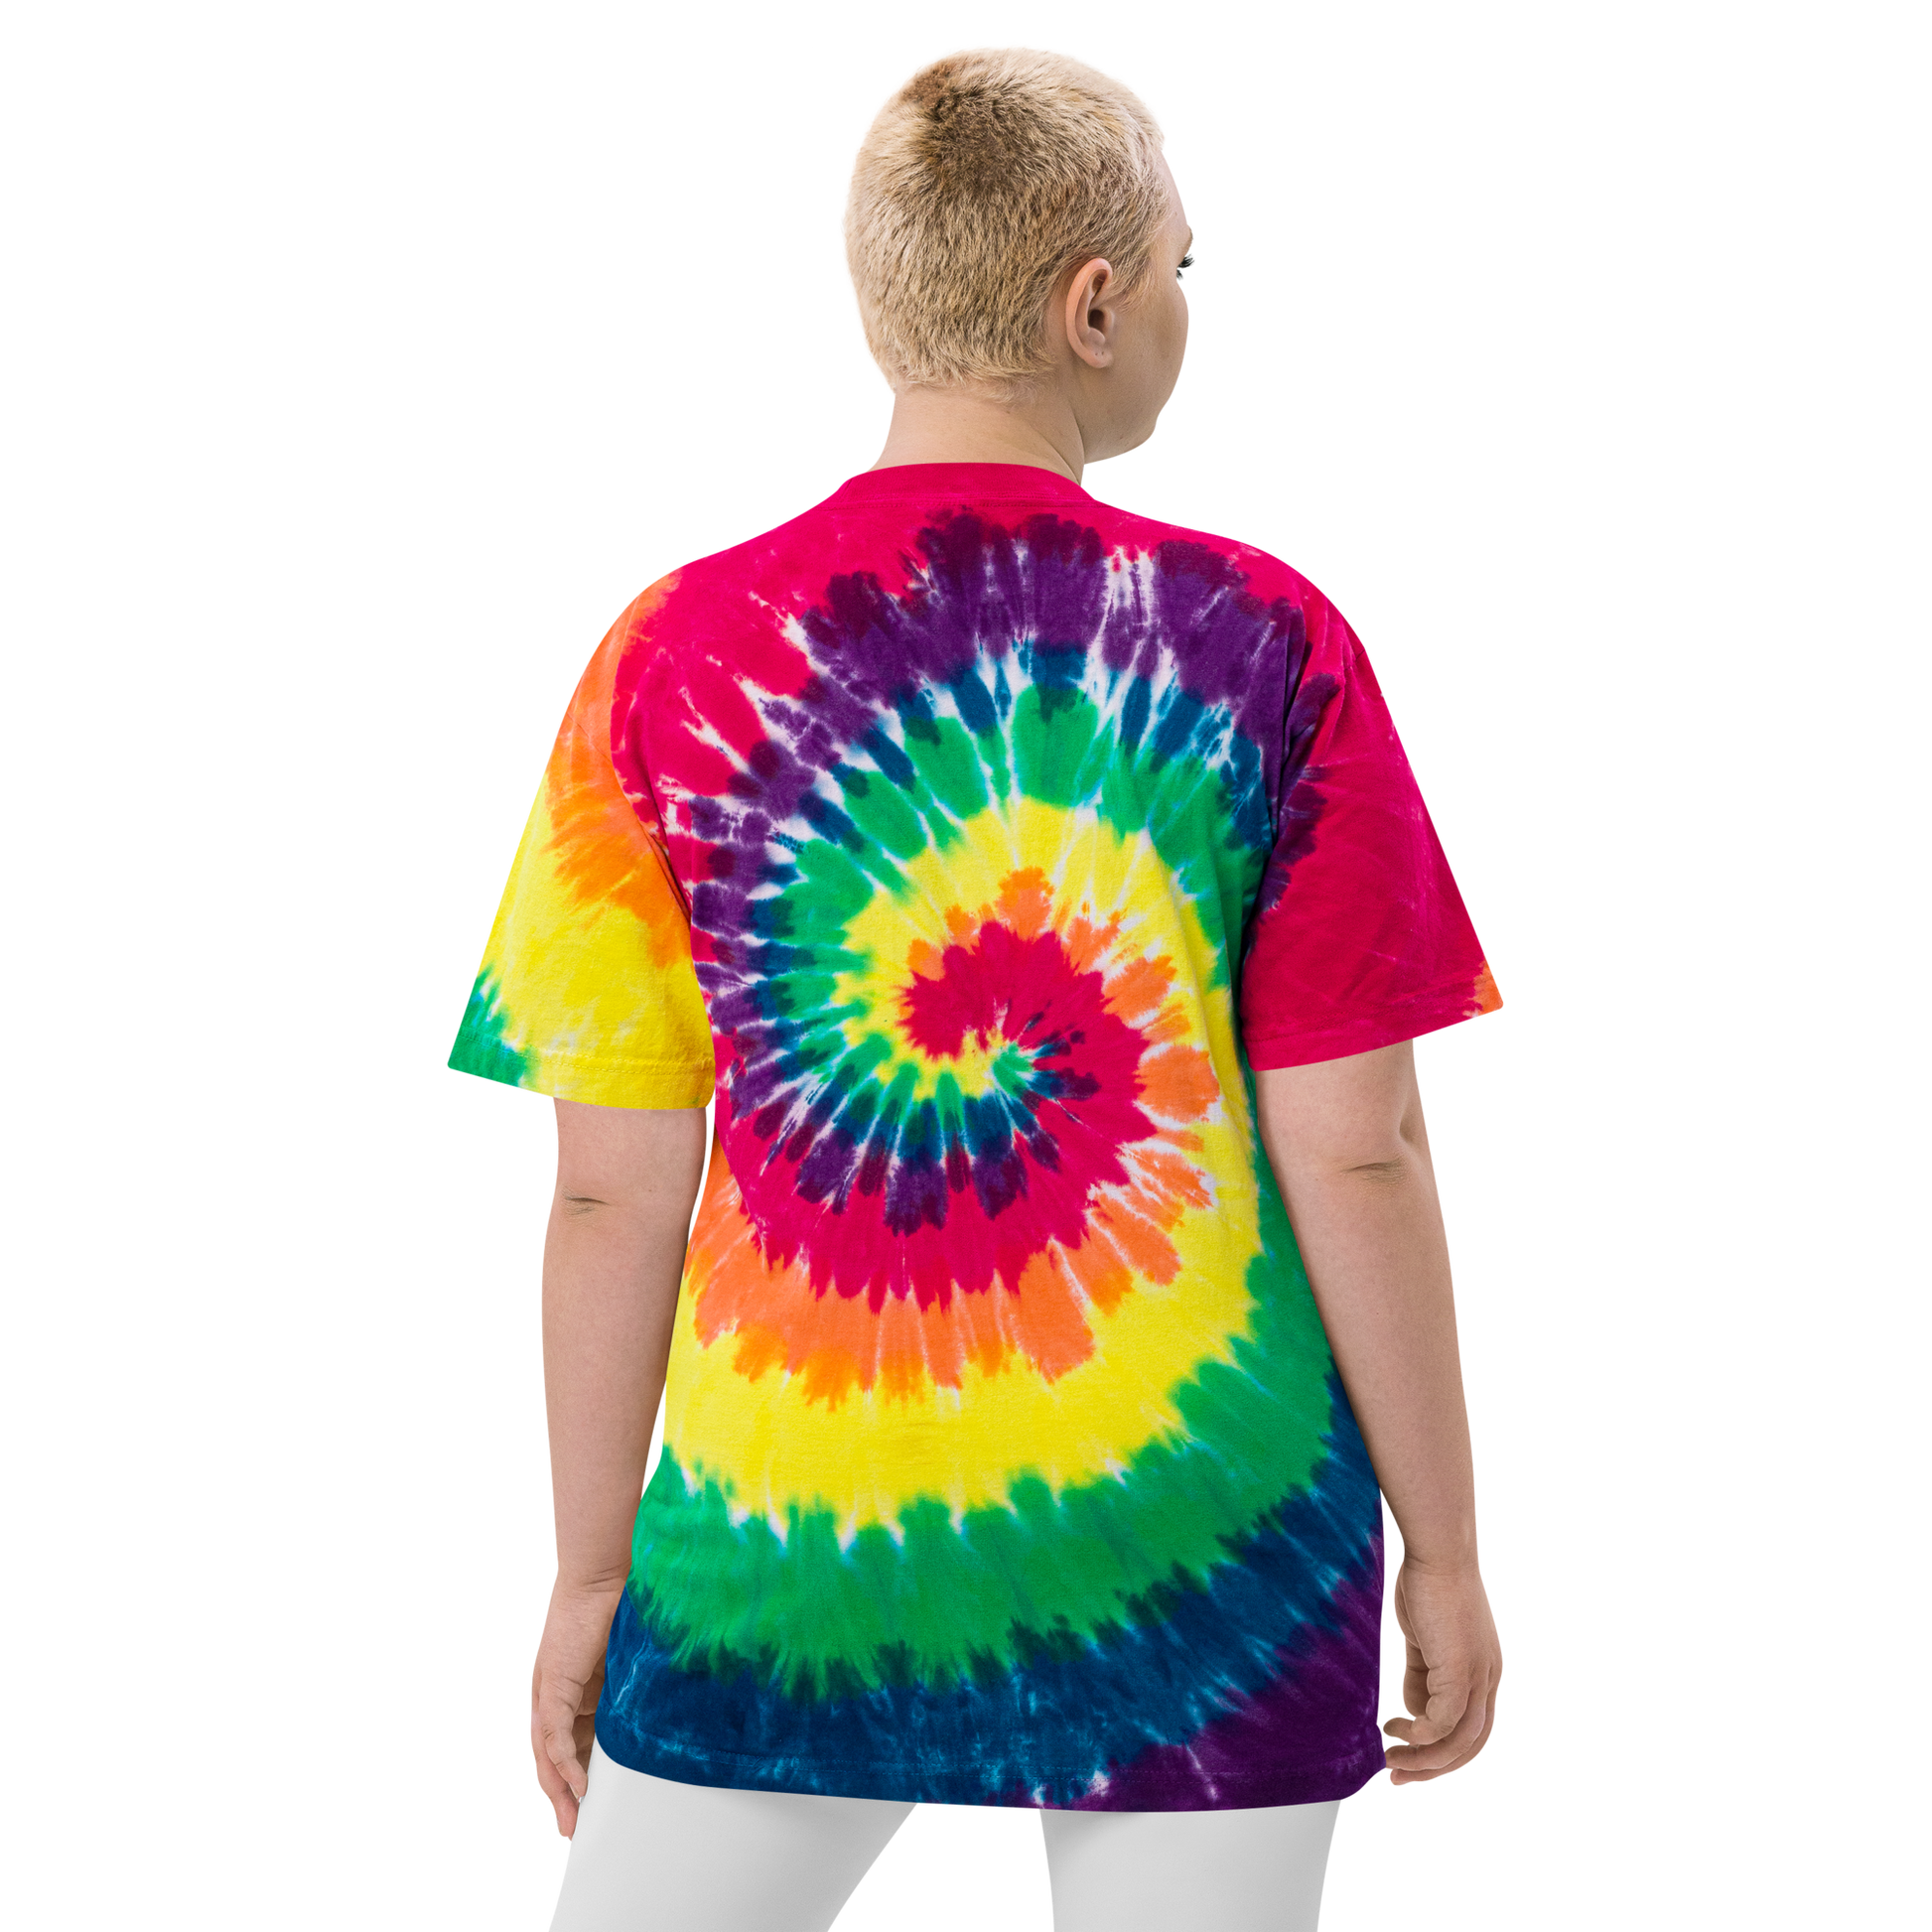 Crossed-X Oversized Tie-Dye T-Shirt • YQB Quebec City • YHM Designs - Image 14